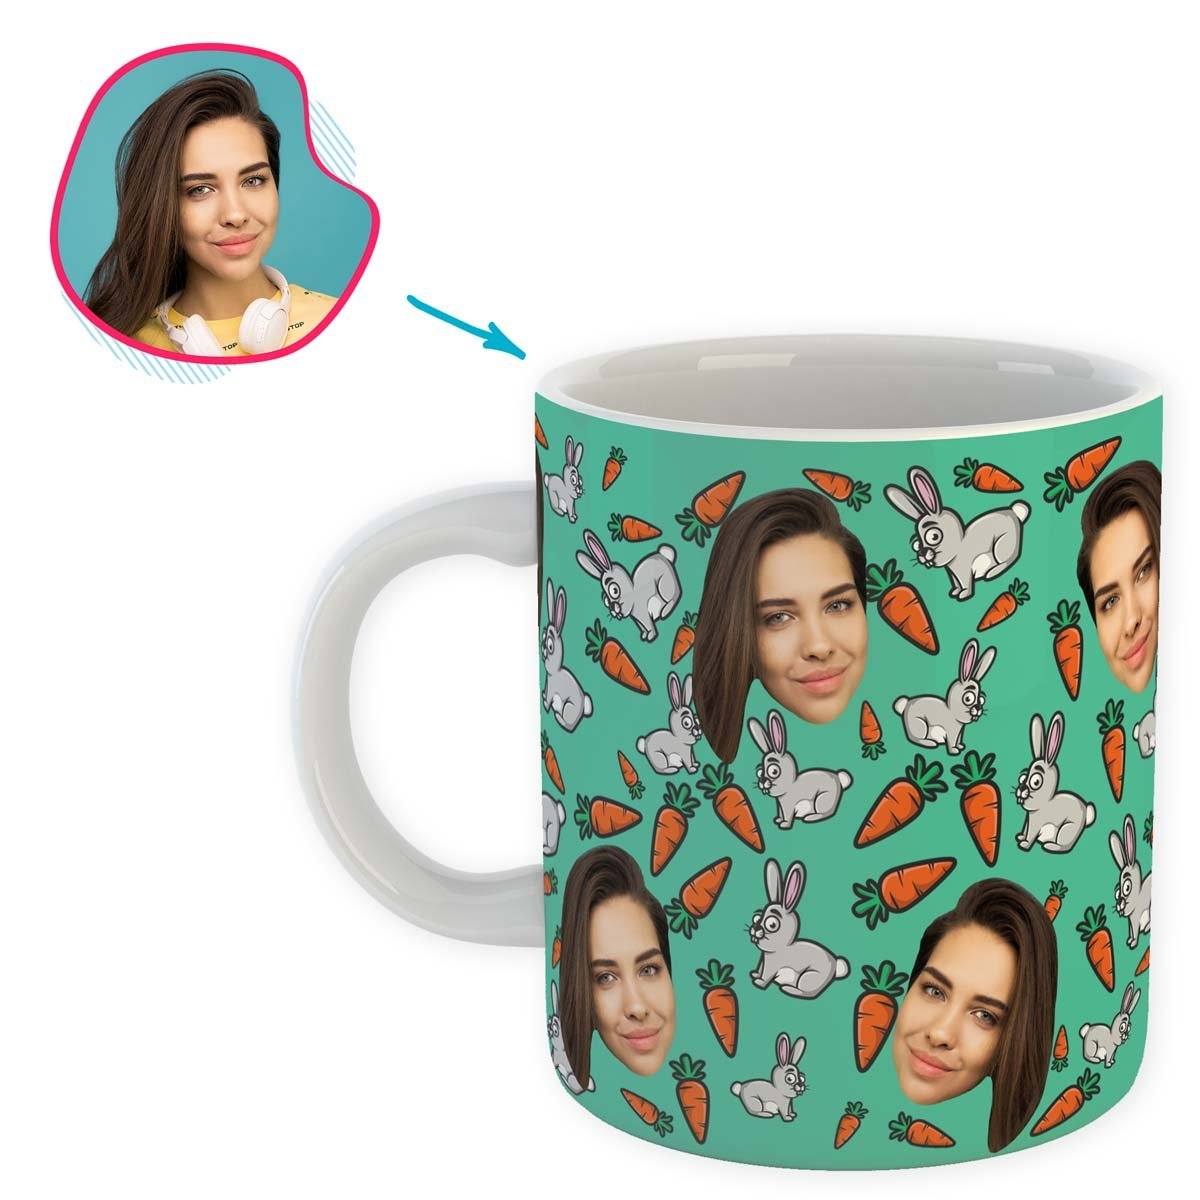 mint Bunny mug personalized with photo of face printed on it